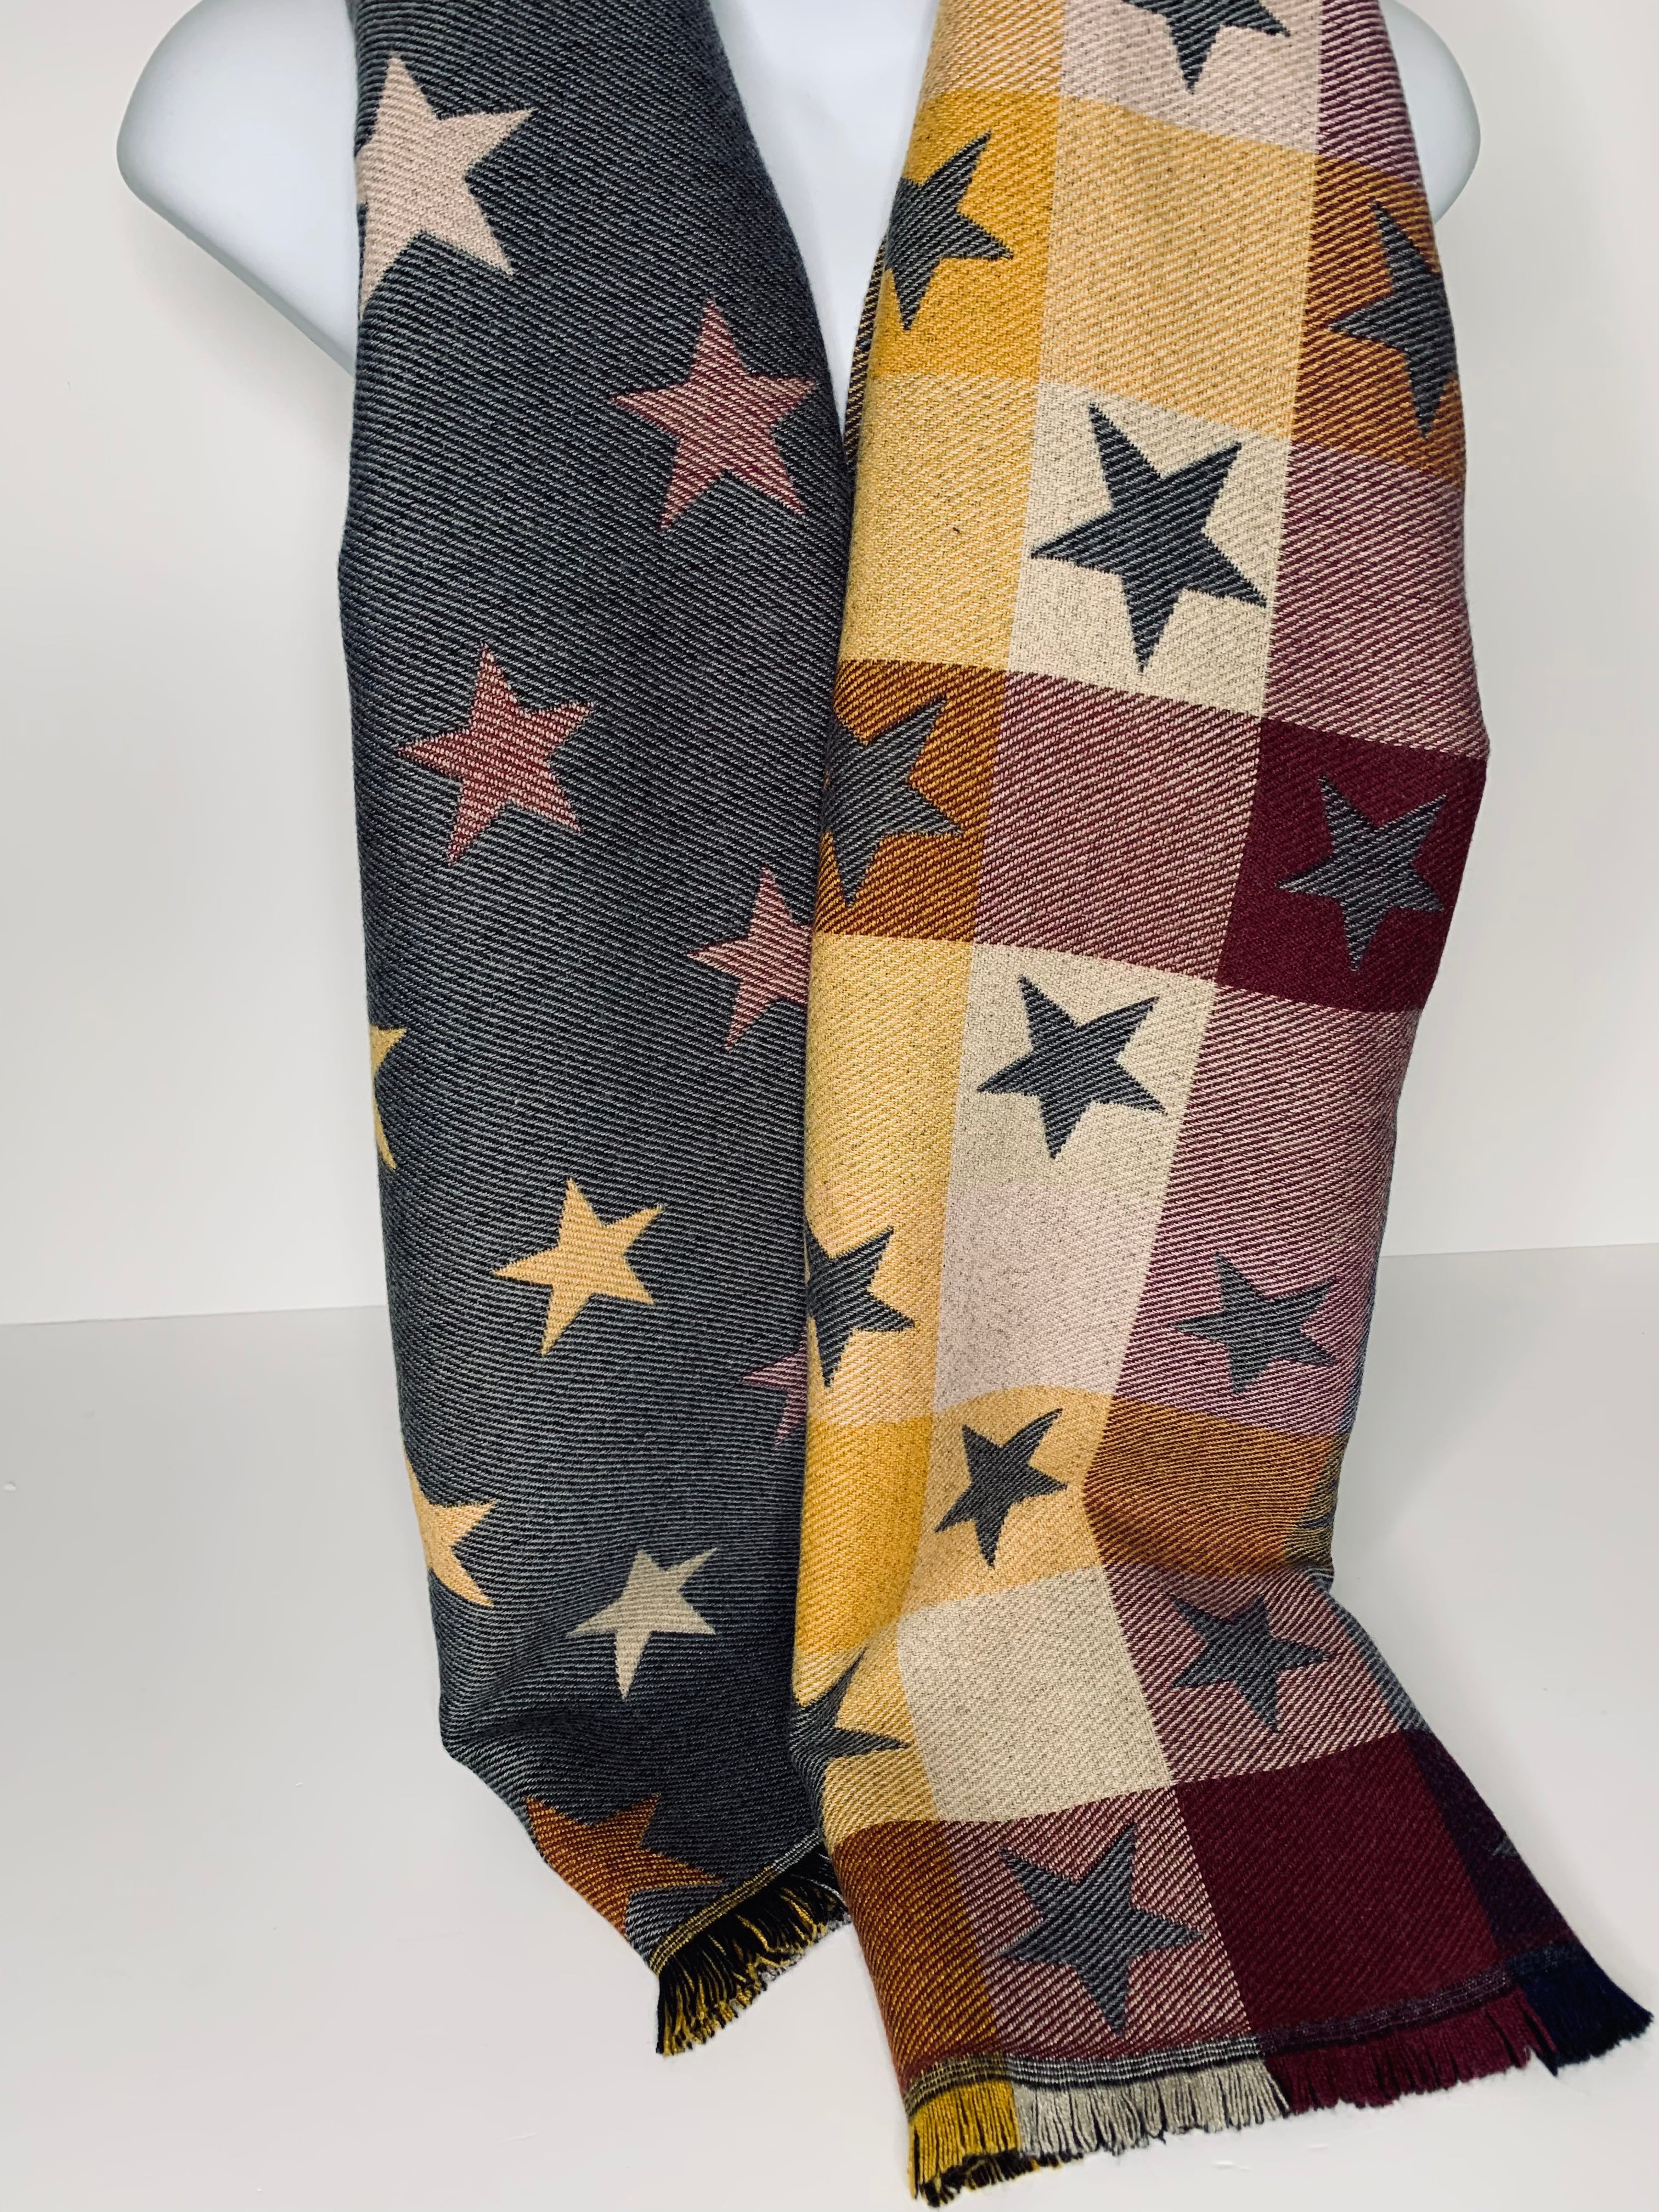 Reversible, cashmere-feel star and tartan print scarf in grey, mustard and burgundy